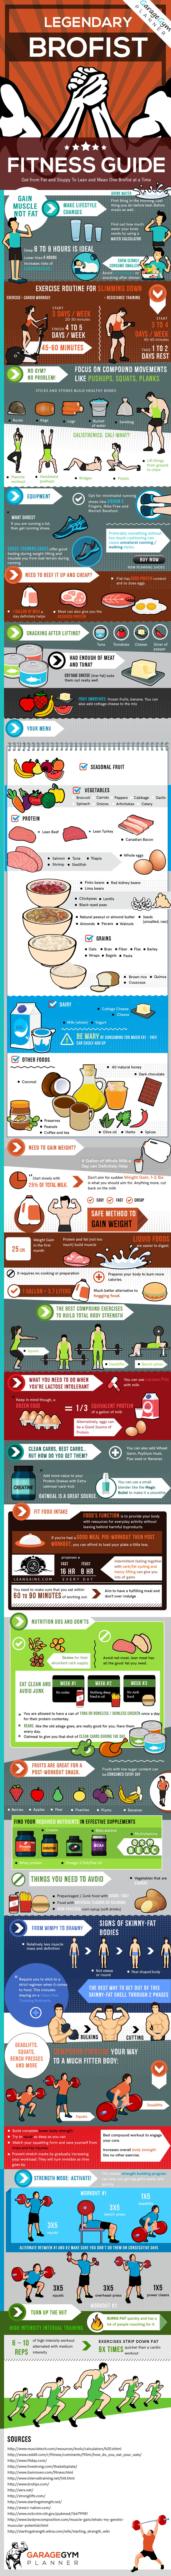 Compound Exercises and Nutrition Plan for Men - Bodybuilding Infographic